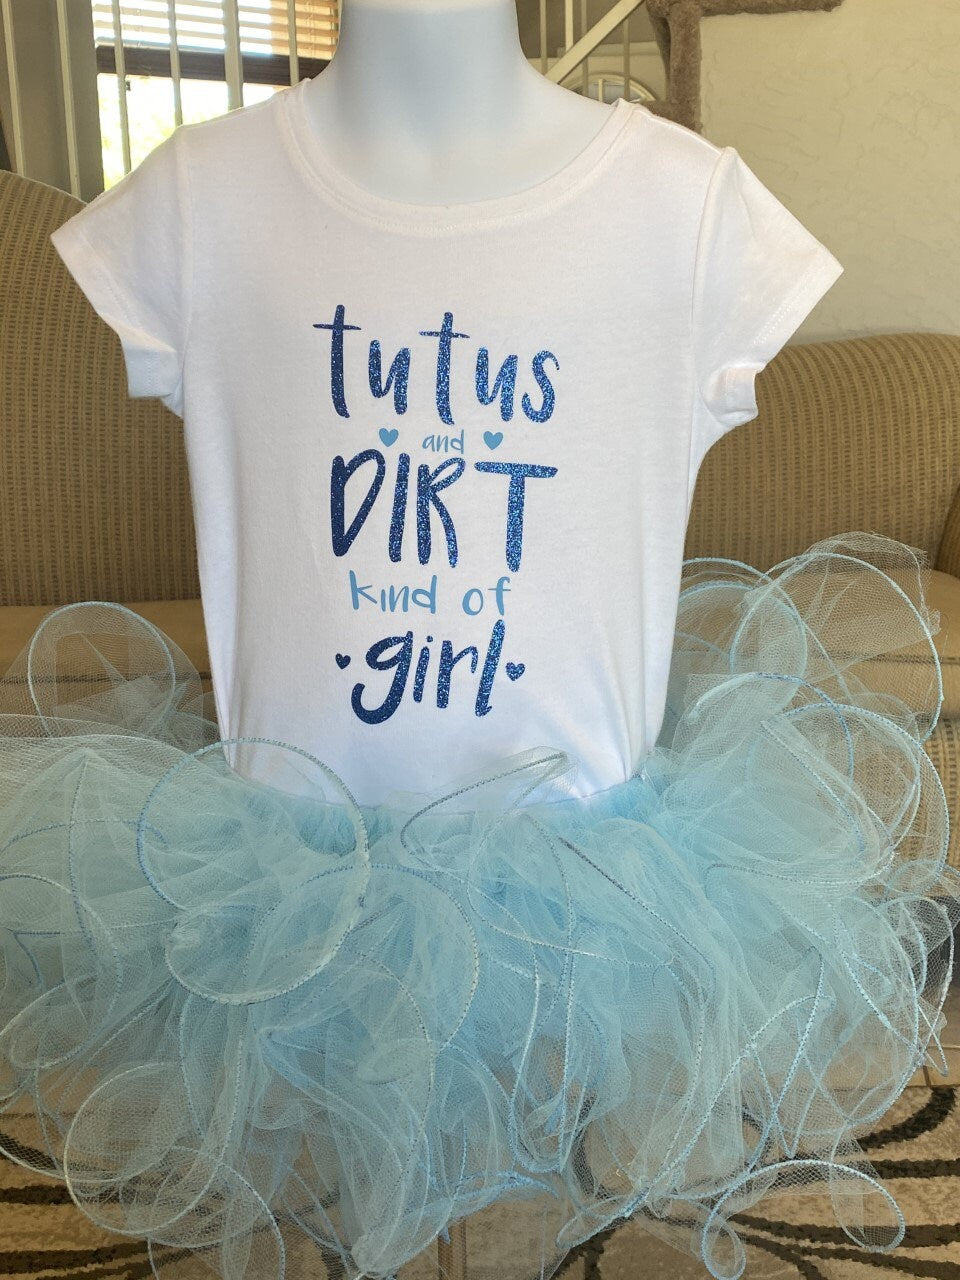 Tutus and dirt kind of girl mud pies girls tutu set dress outfit photo prop gift present teen toddler favorite best seller birthday tomboy